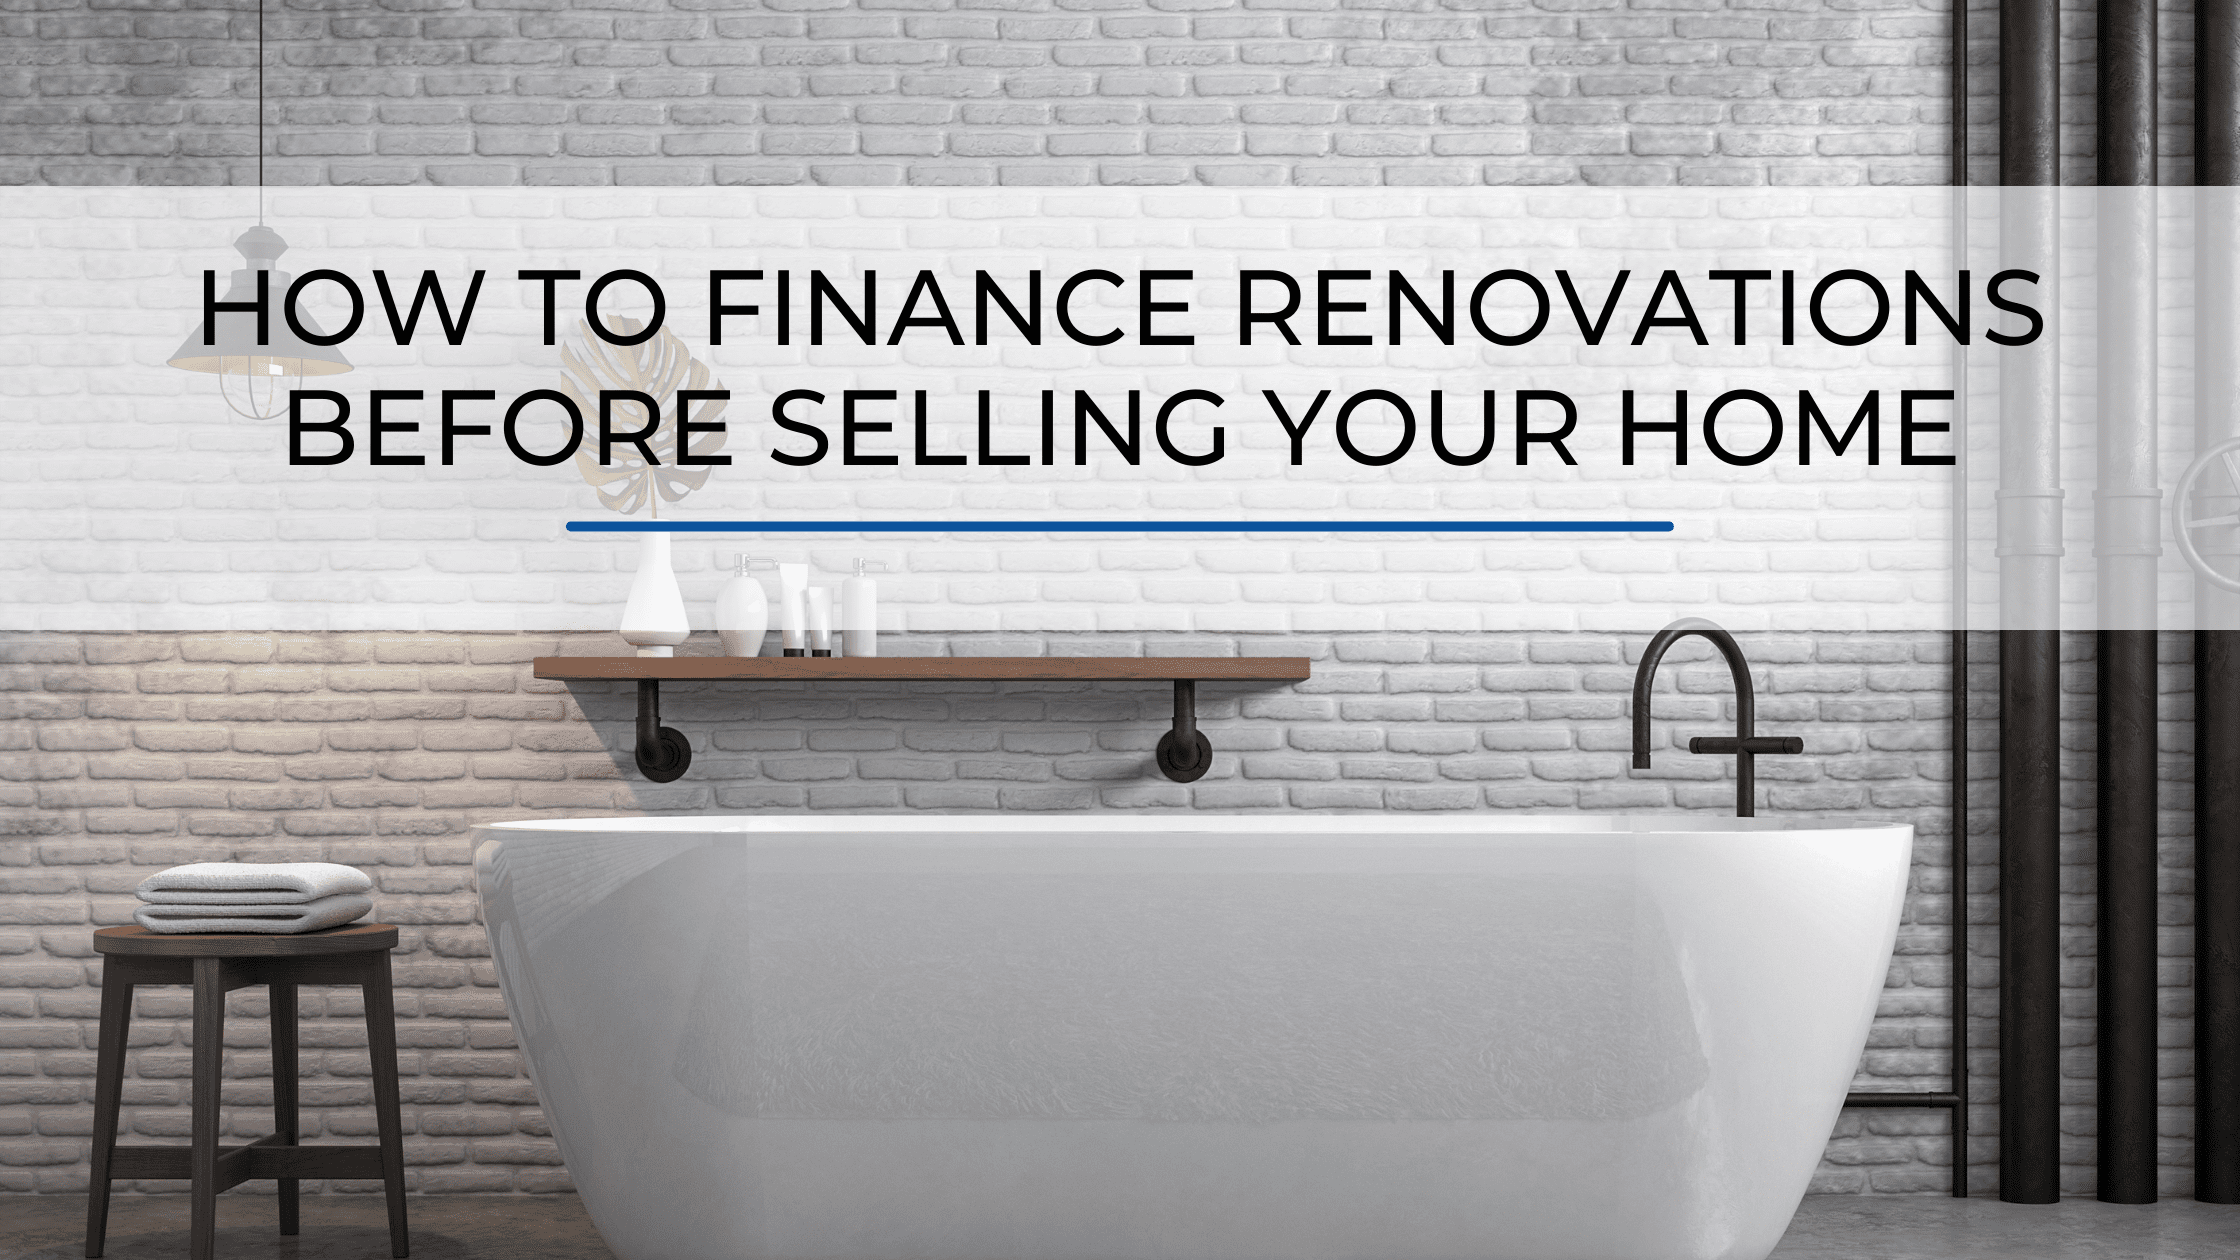 How to Finance Renovations Before Selling Your Home